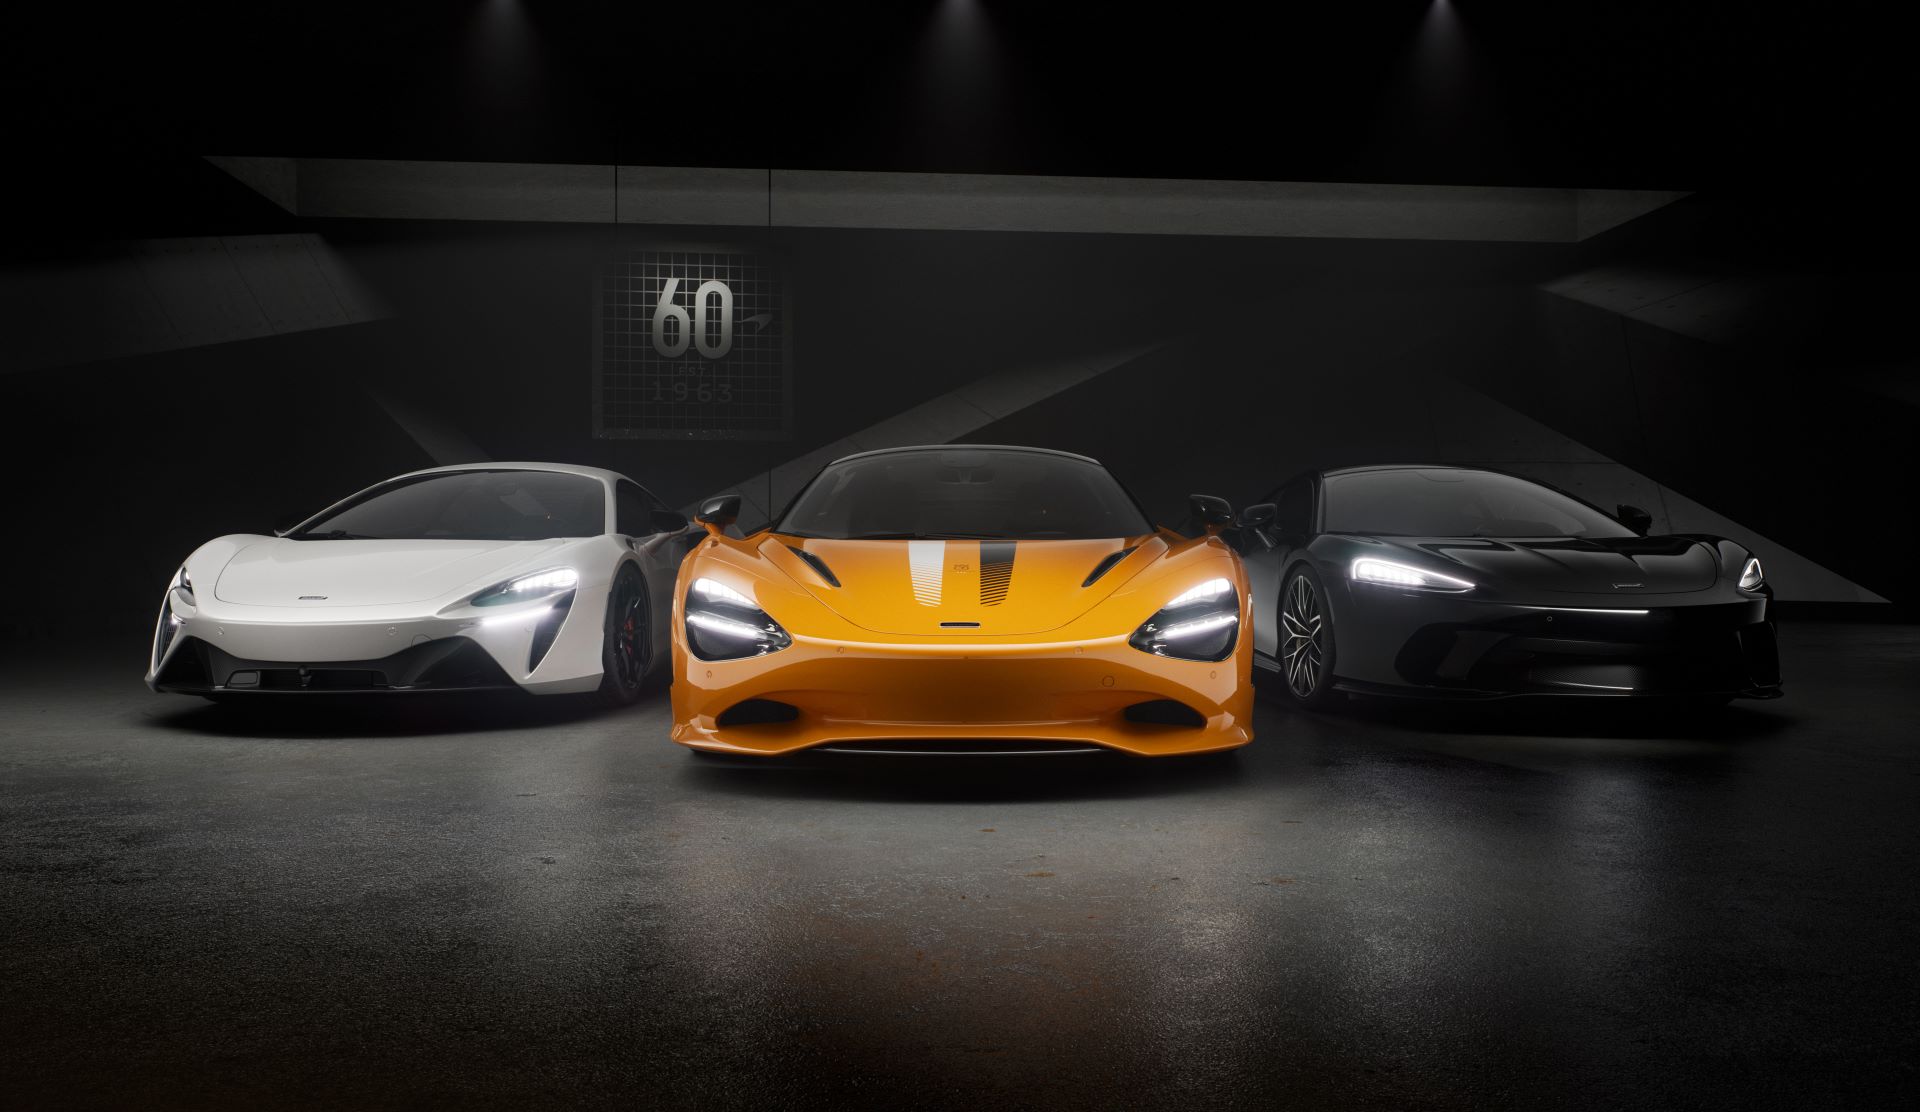 Exclusive 60th Anniversary options for McLaren supercars give customers an opportunity to personalise their new McLaren